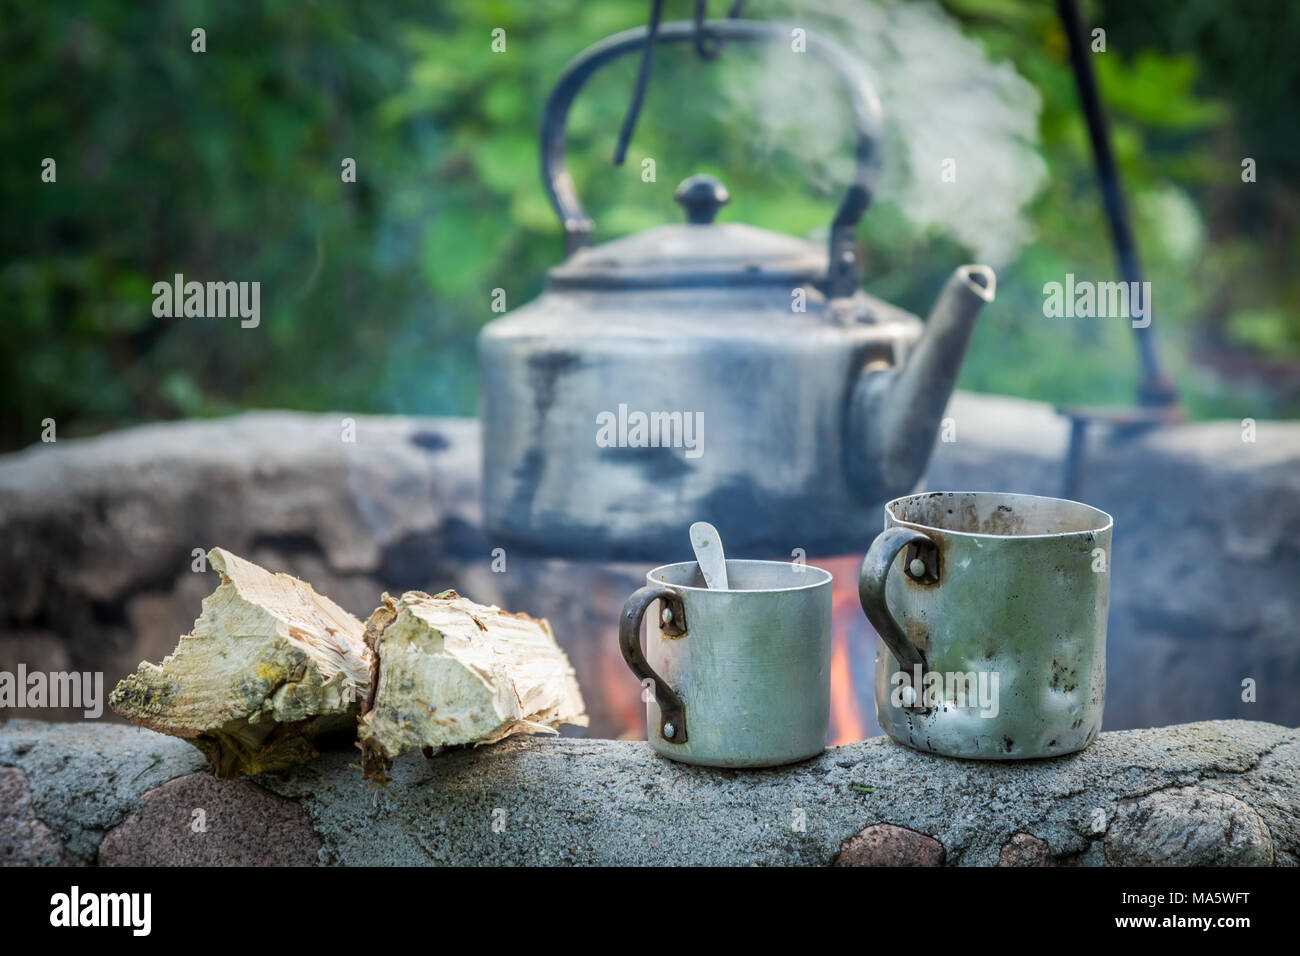 https://c8.alamy.com/comp/MA5WFT/coffee-with-kettle-on-campfire-in-summer-MA5WFT.jpg